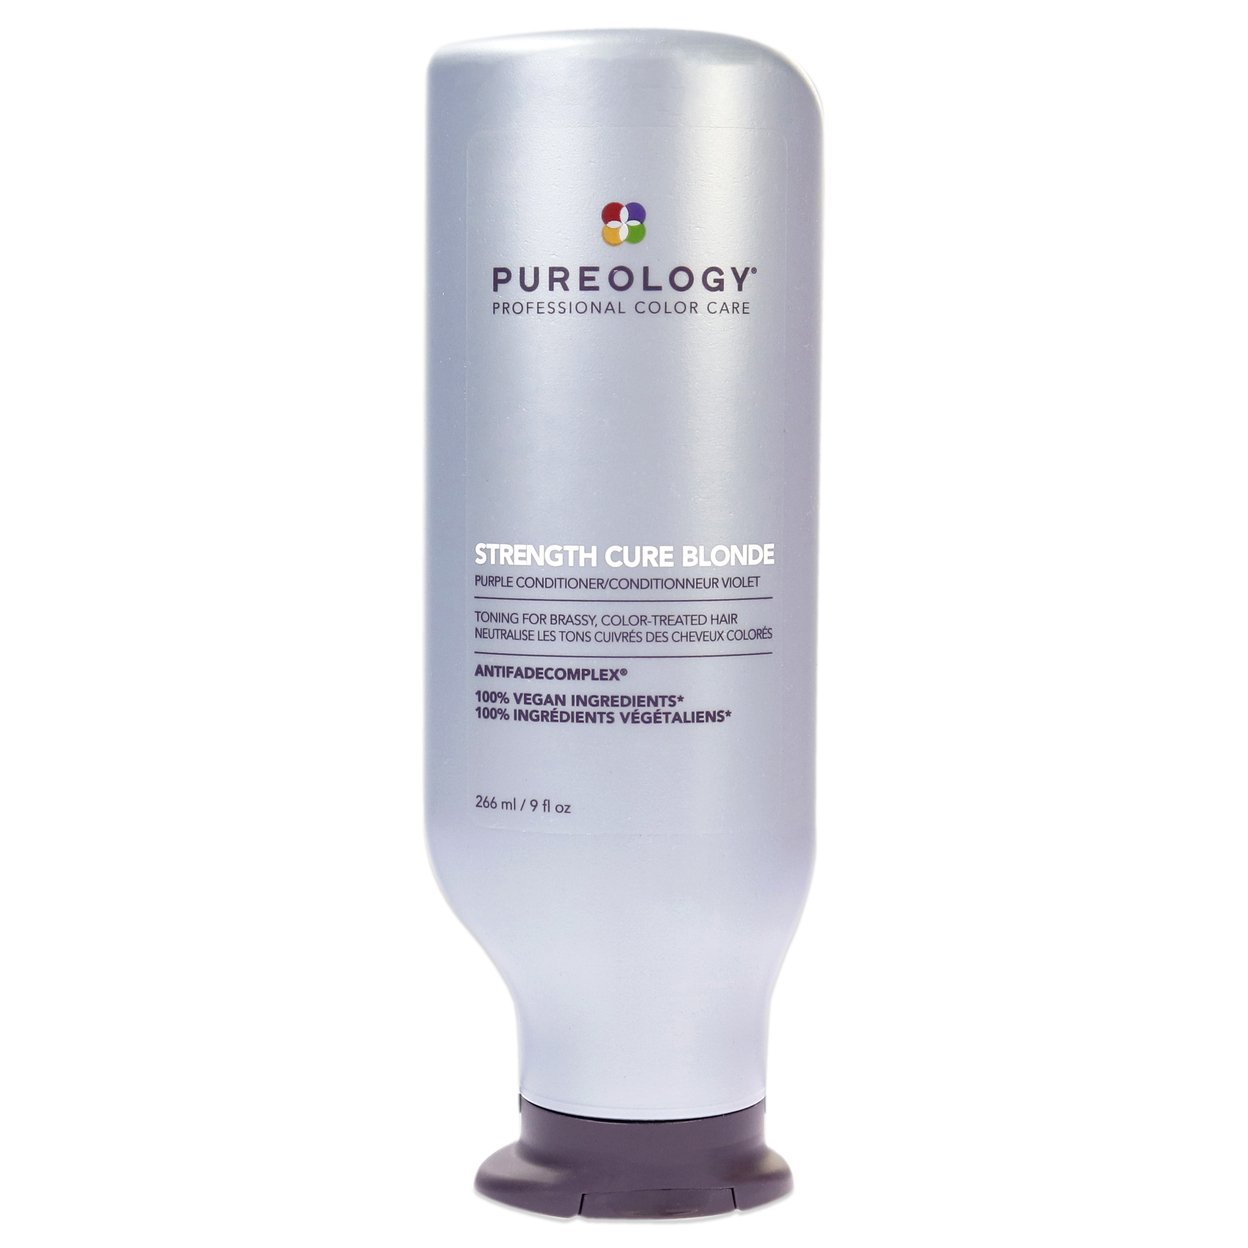 Pureology Unisex HAIRCARE Strength Cure Blonde Conditioner 9 Oz